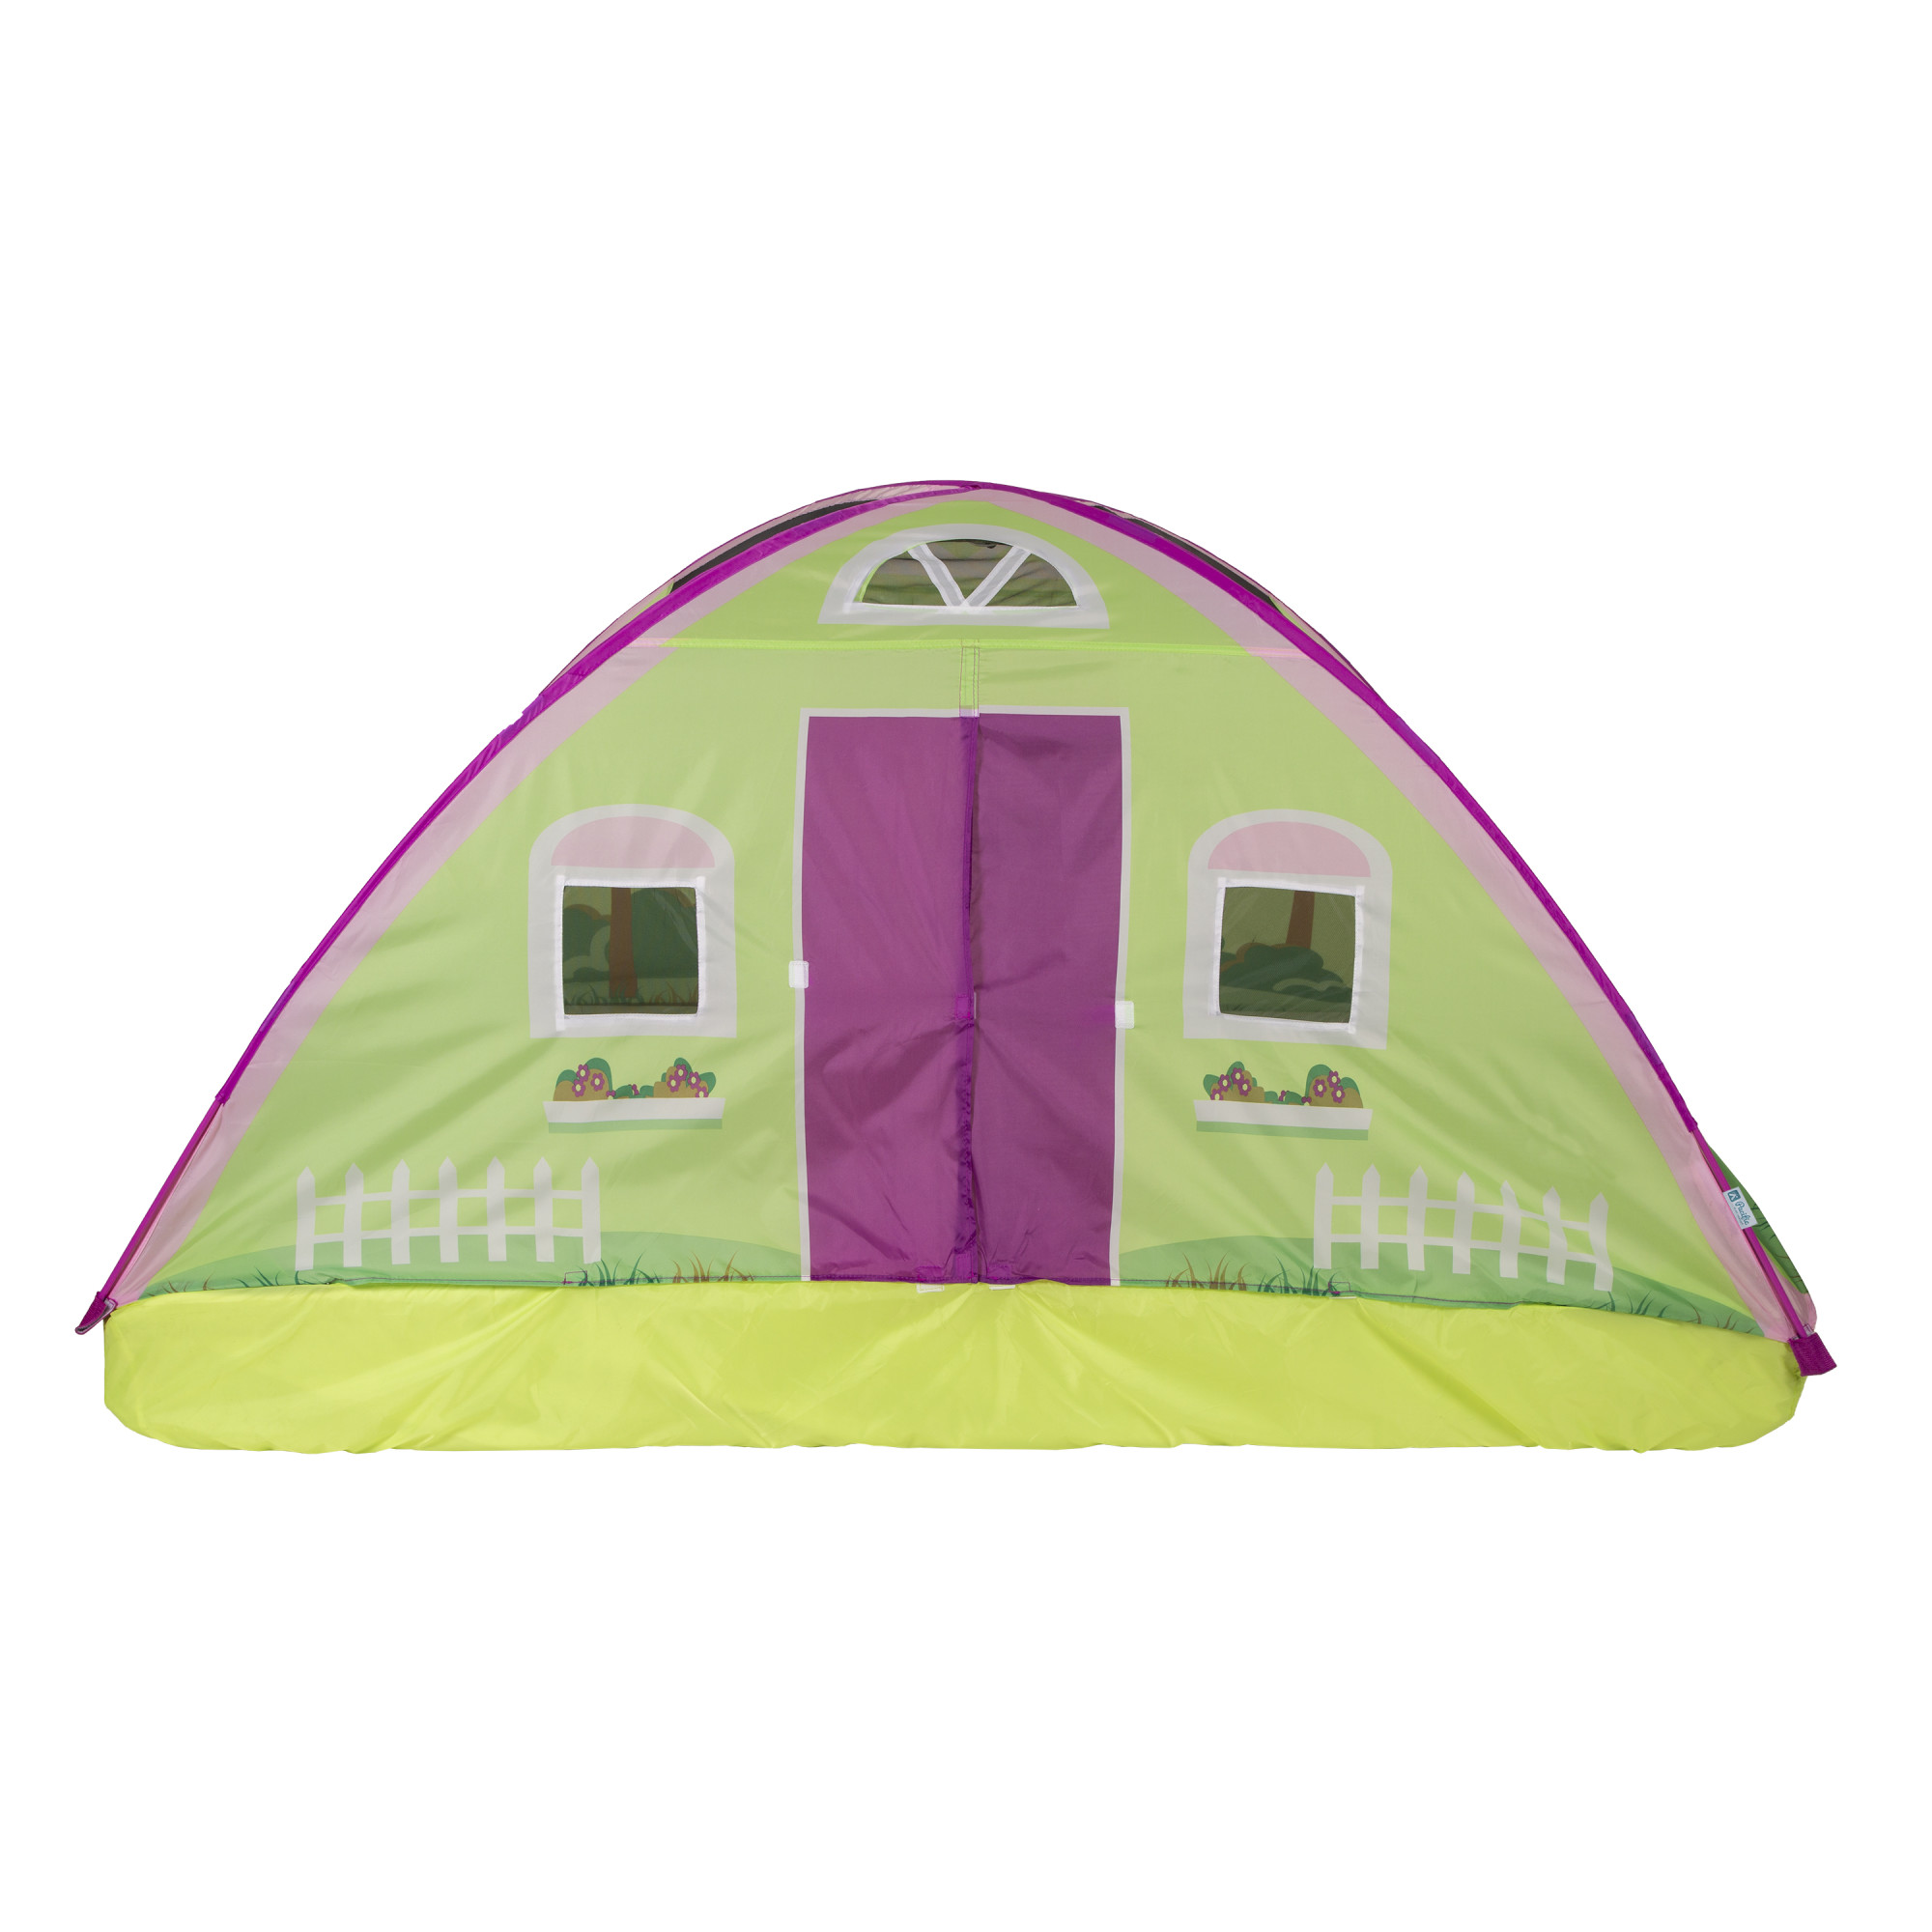 Pacific Play Tents Cottage Bed Tent, Twin - image 2 of 17